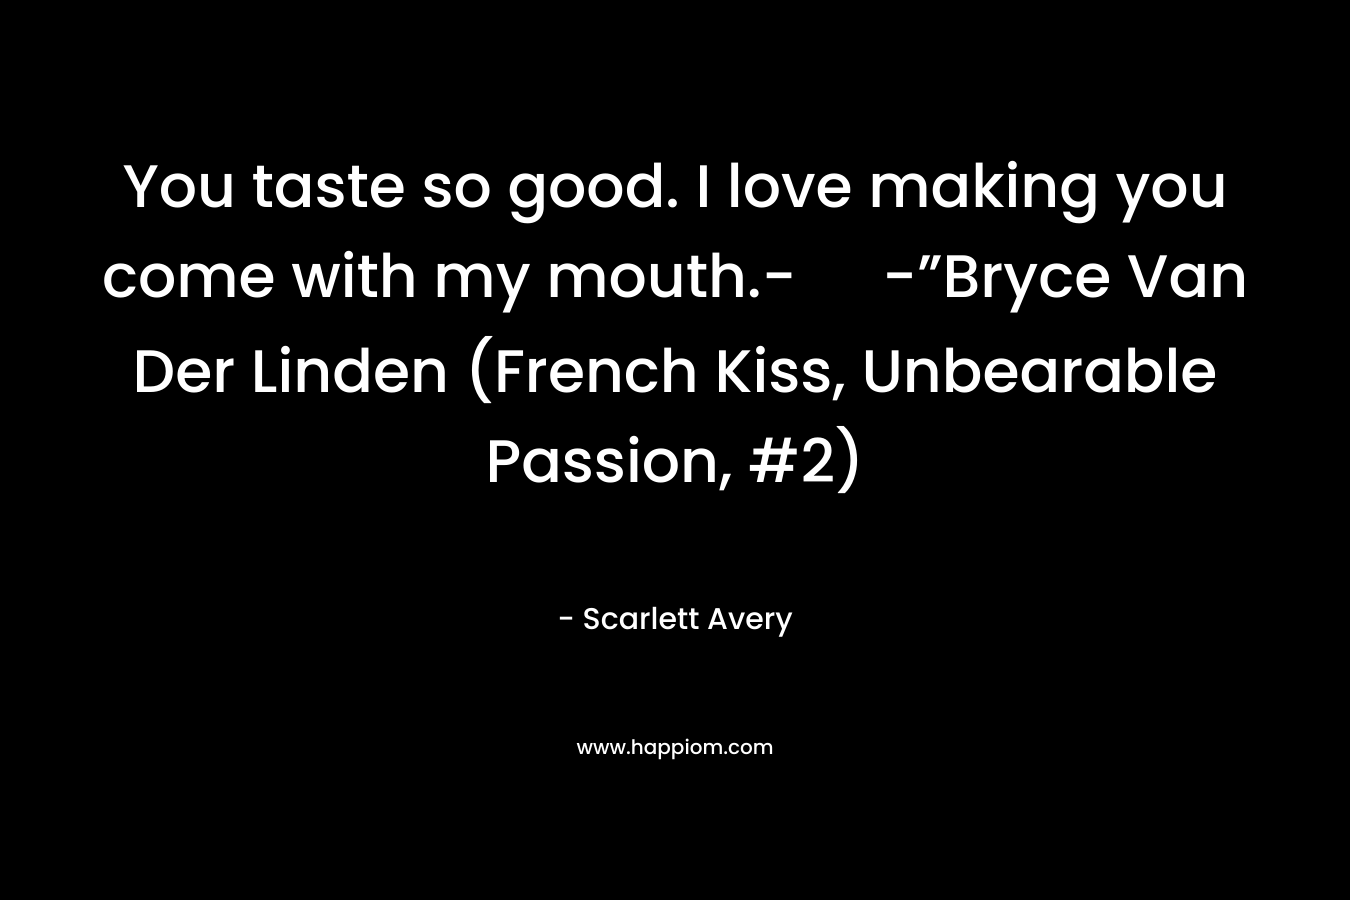 You taste so good. I love making you come with my mouth.- -”Bryce Van Der Linden (French Kiss, Unbearable Passion, #2) – Scarlett Avery